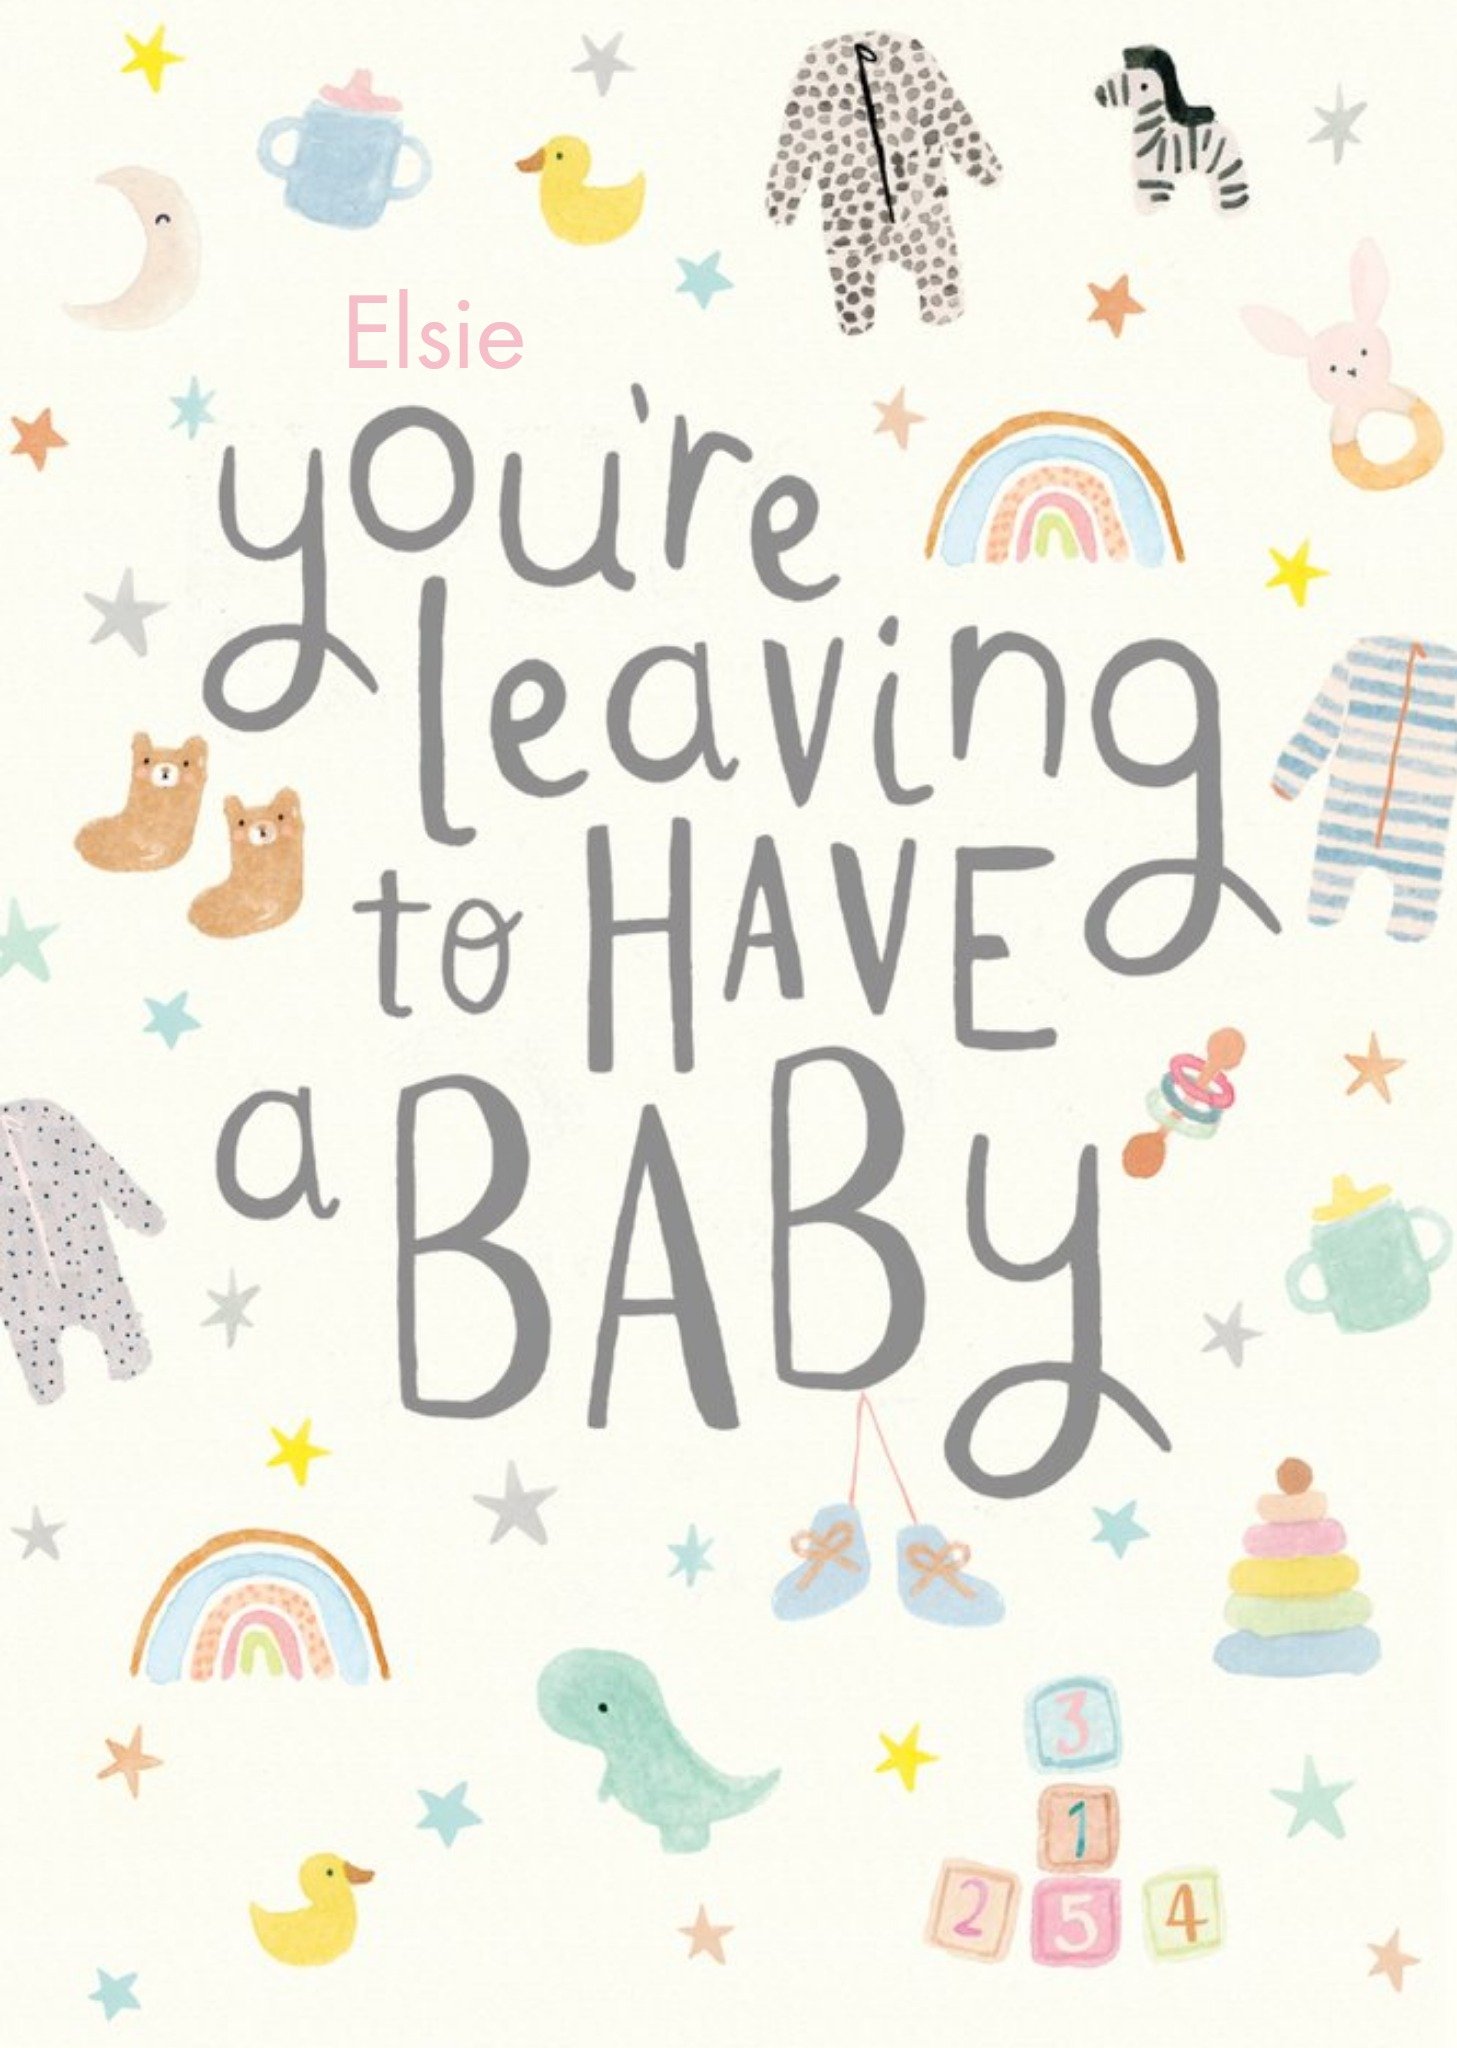 Moonpig Handwritten Typography With Baby Themed Spot Illustrations You're Leaving To Have A Baby Car